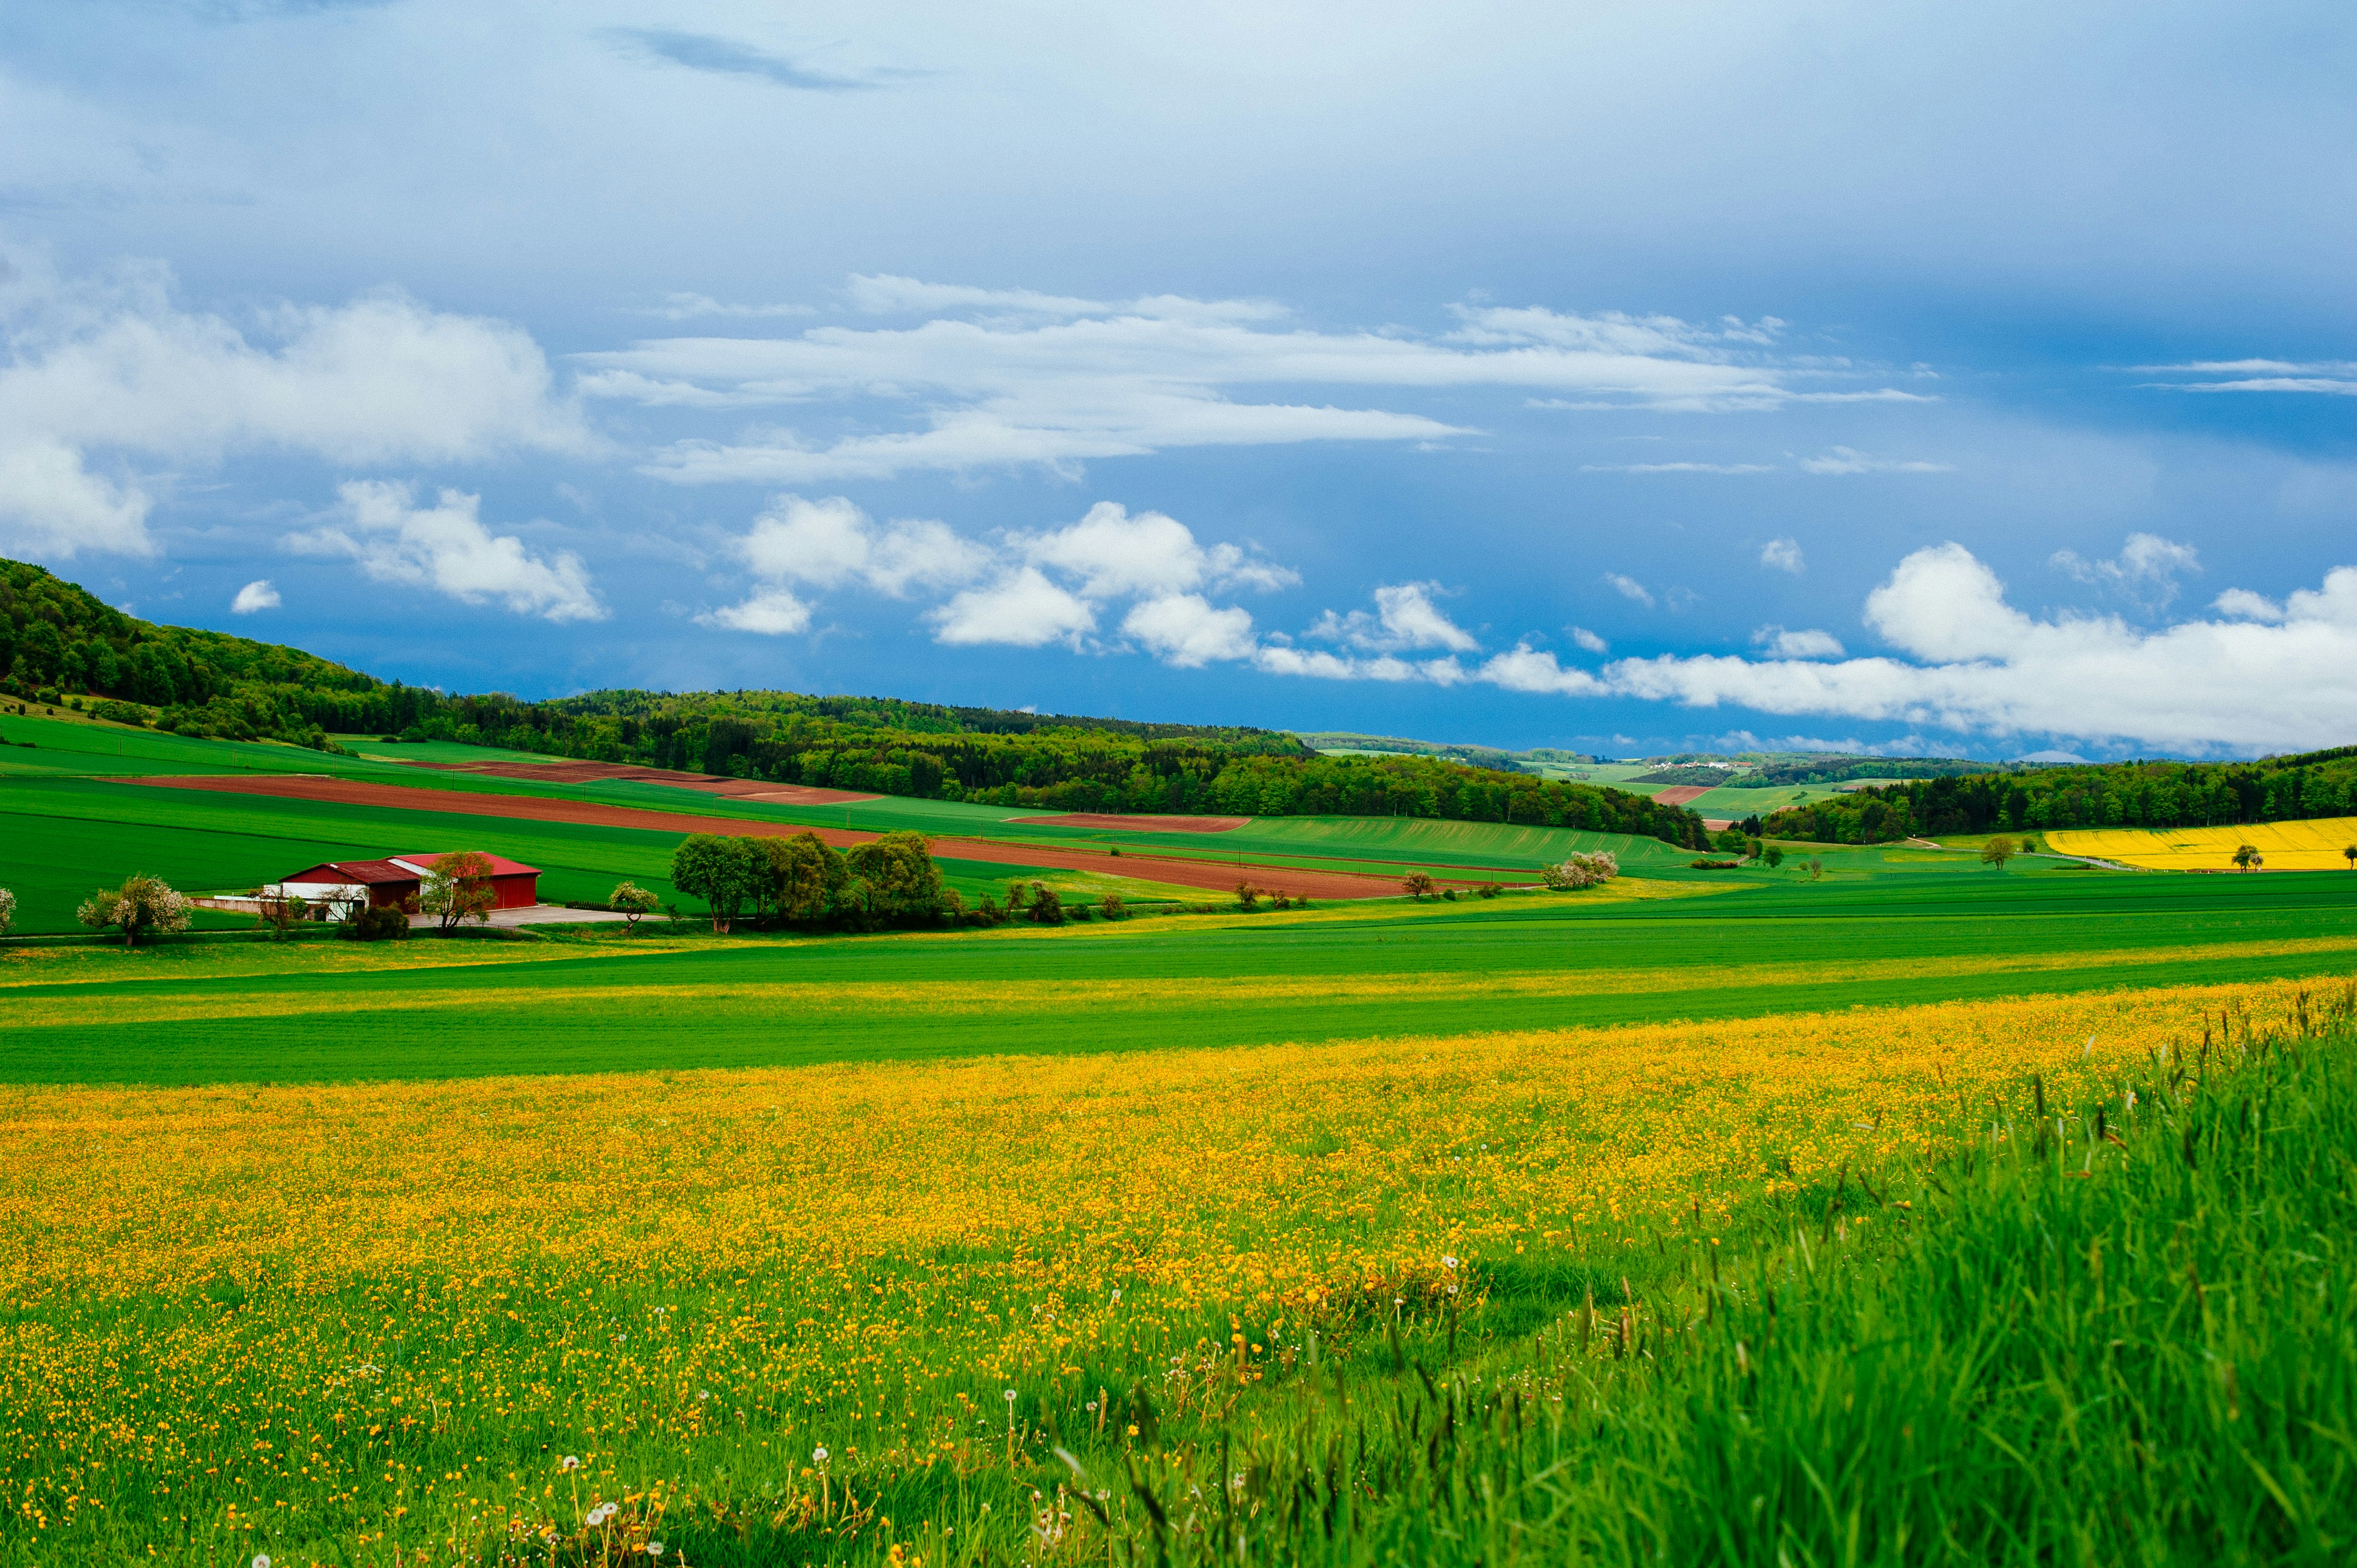 View of a rapeseed field (mustard field) in the German countryside.